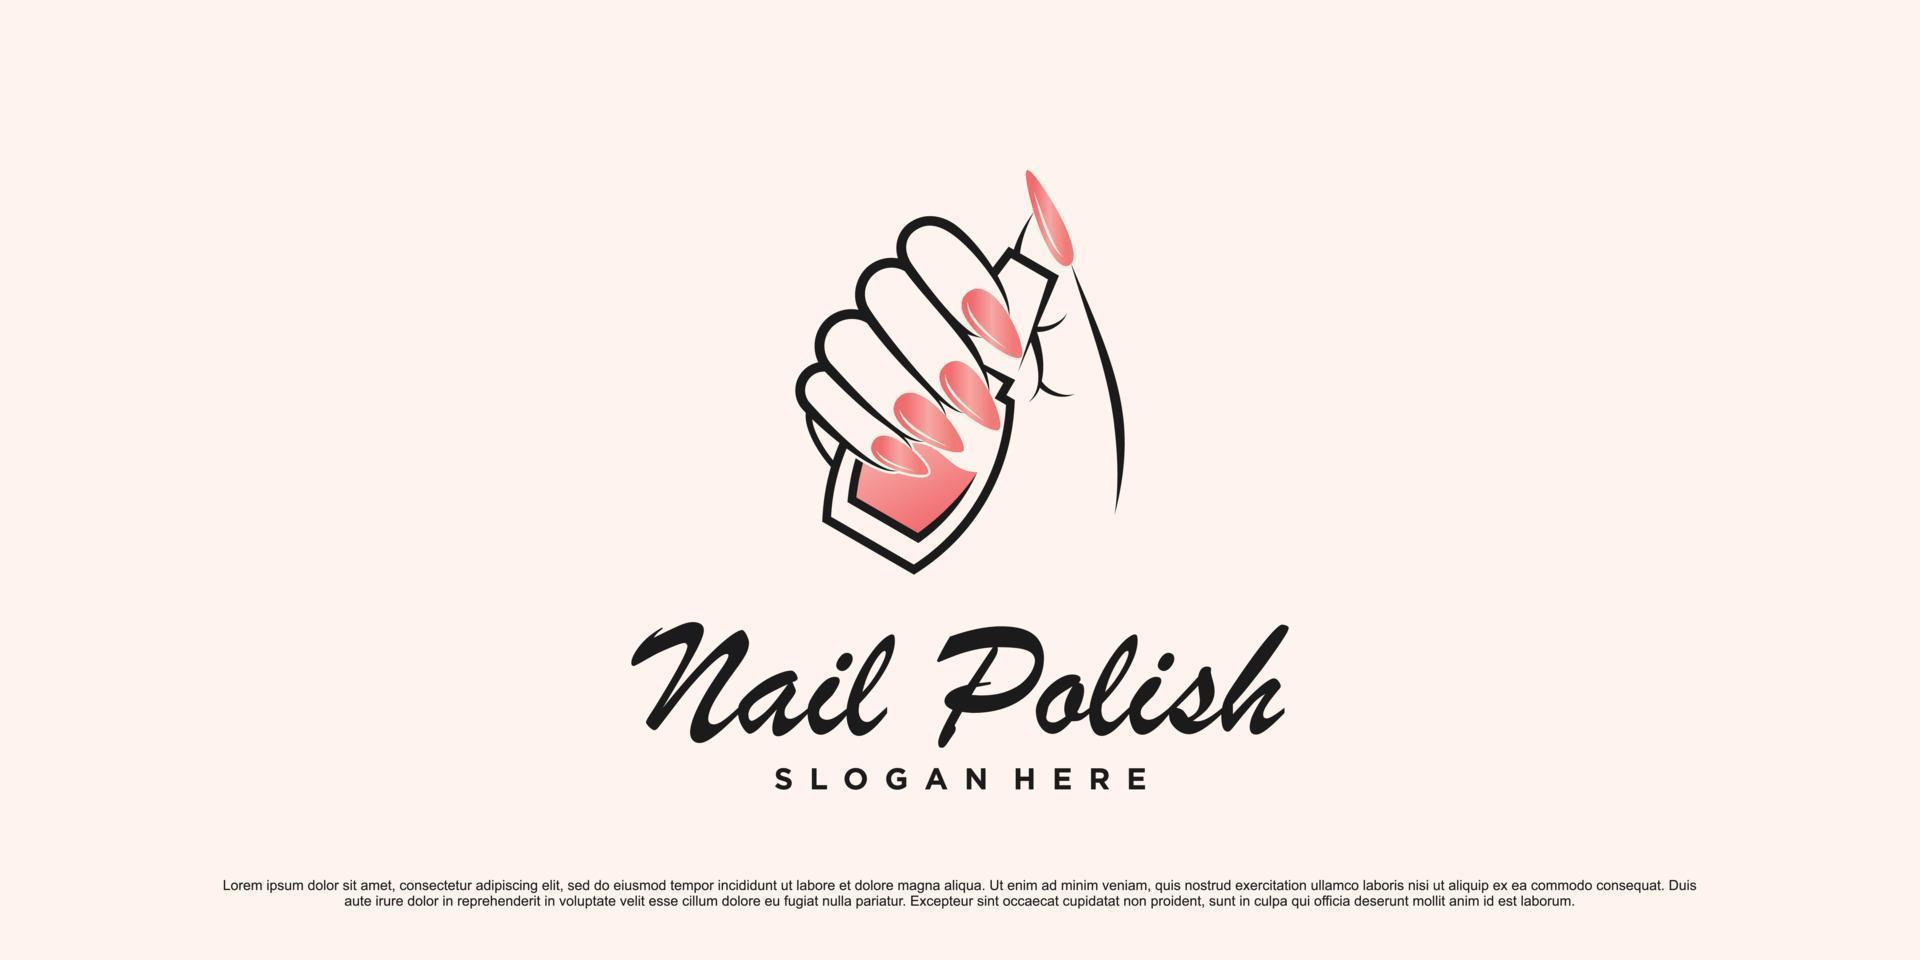 Nail polish and manicure logo design with woman hands and bottle icon Premium Vector